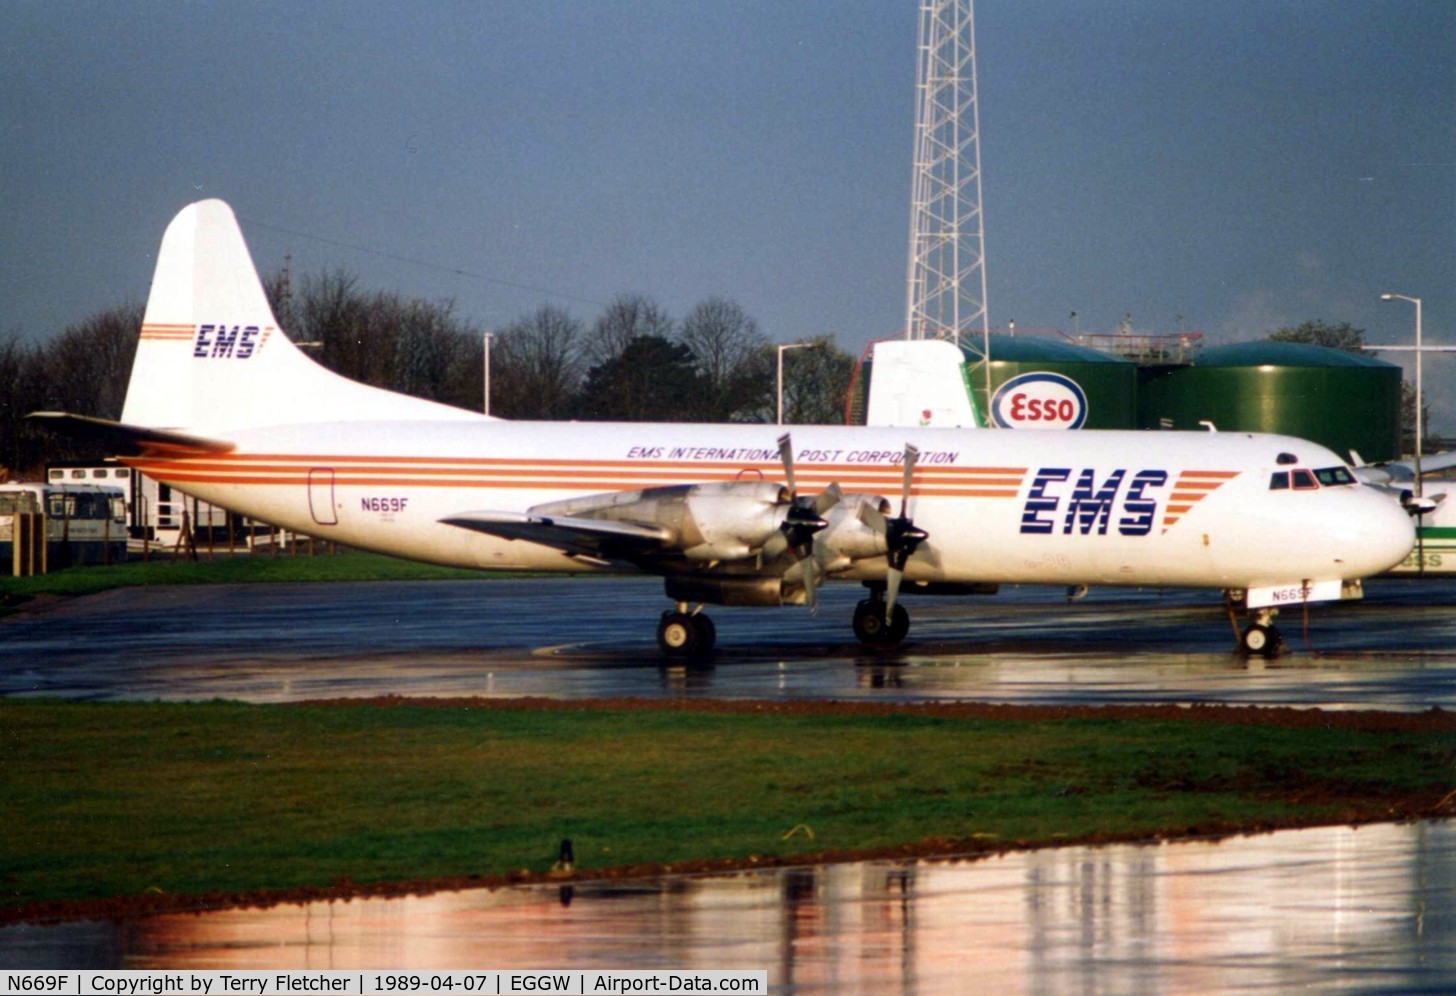 N669F, 1960 Lockheed L-188A(F) Electra C/N 1116, EMS's Lockheed Electra sits in the Luton early morning sunlight in 1989